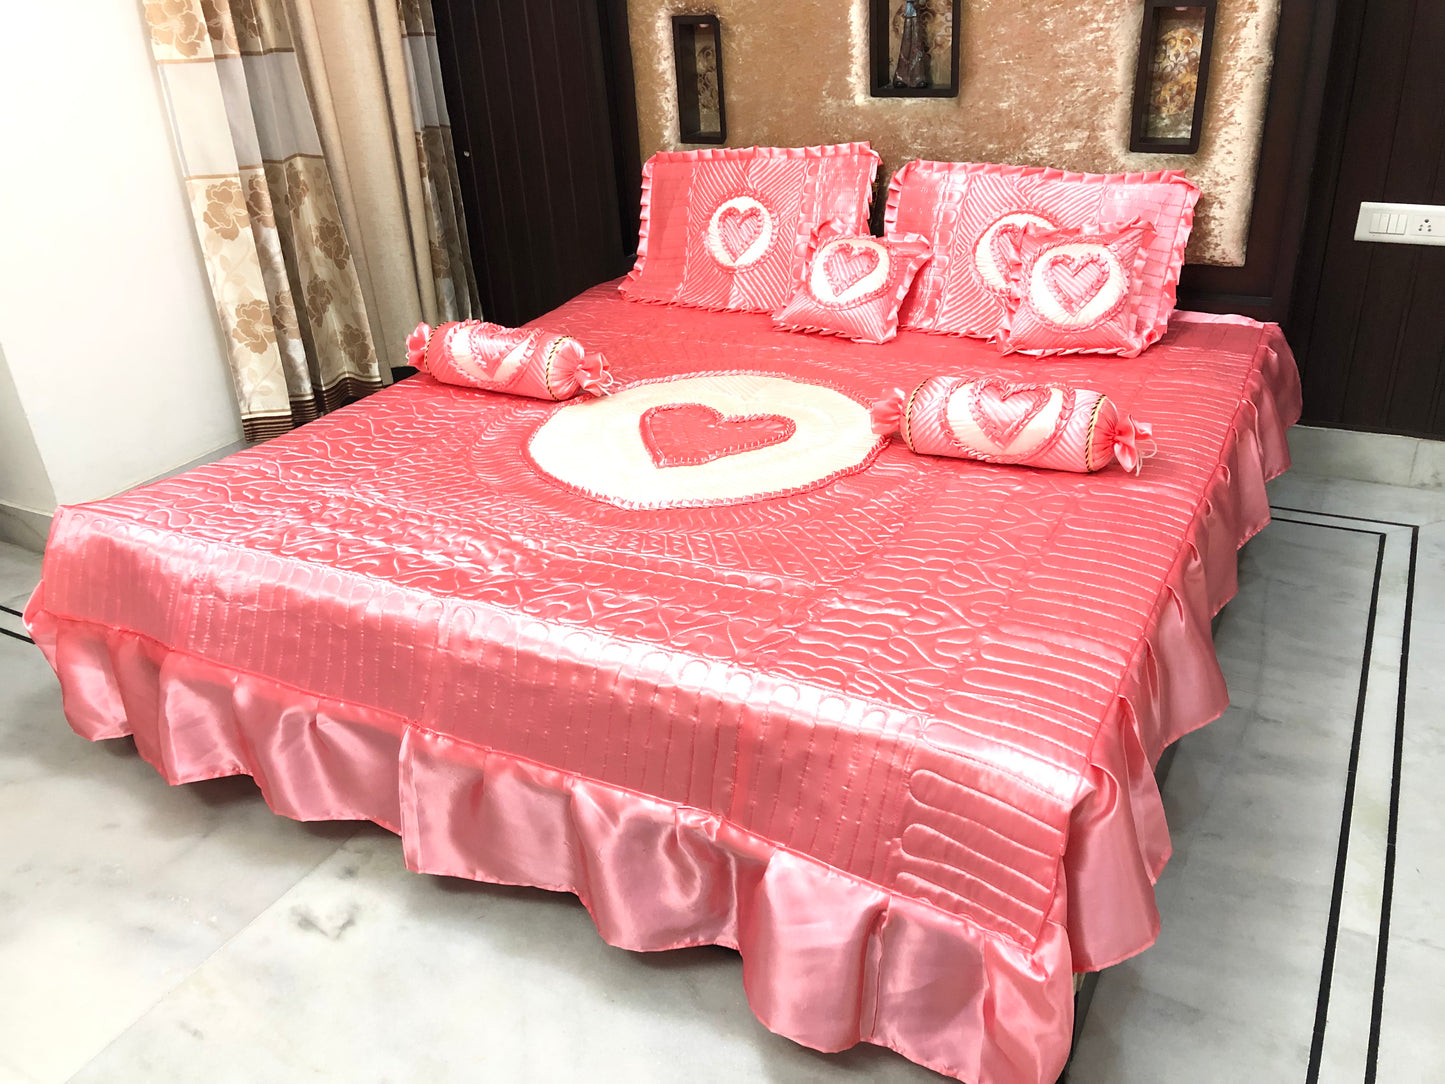 loomsmith-satin-bedsheet-set-of-7-heart-design-in-carrot-color-two-filled-cushions-two-filled-bolsters-King-Size-set-two-pillow-covers